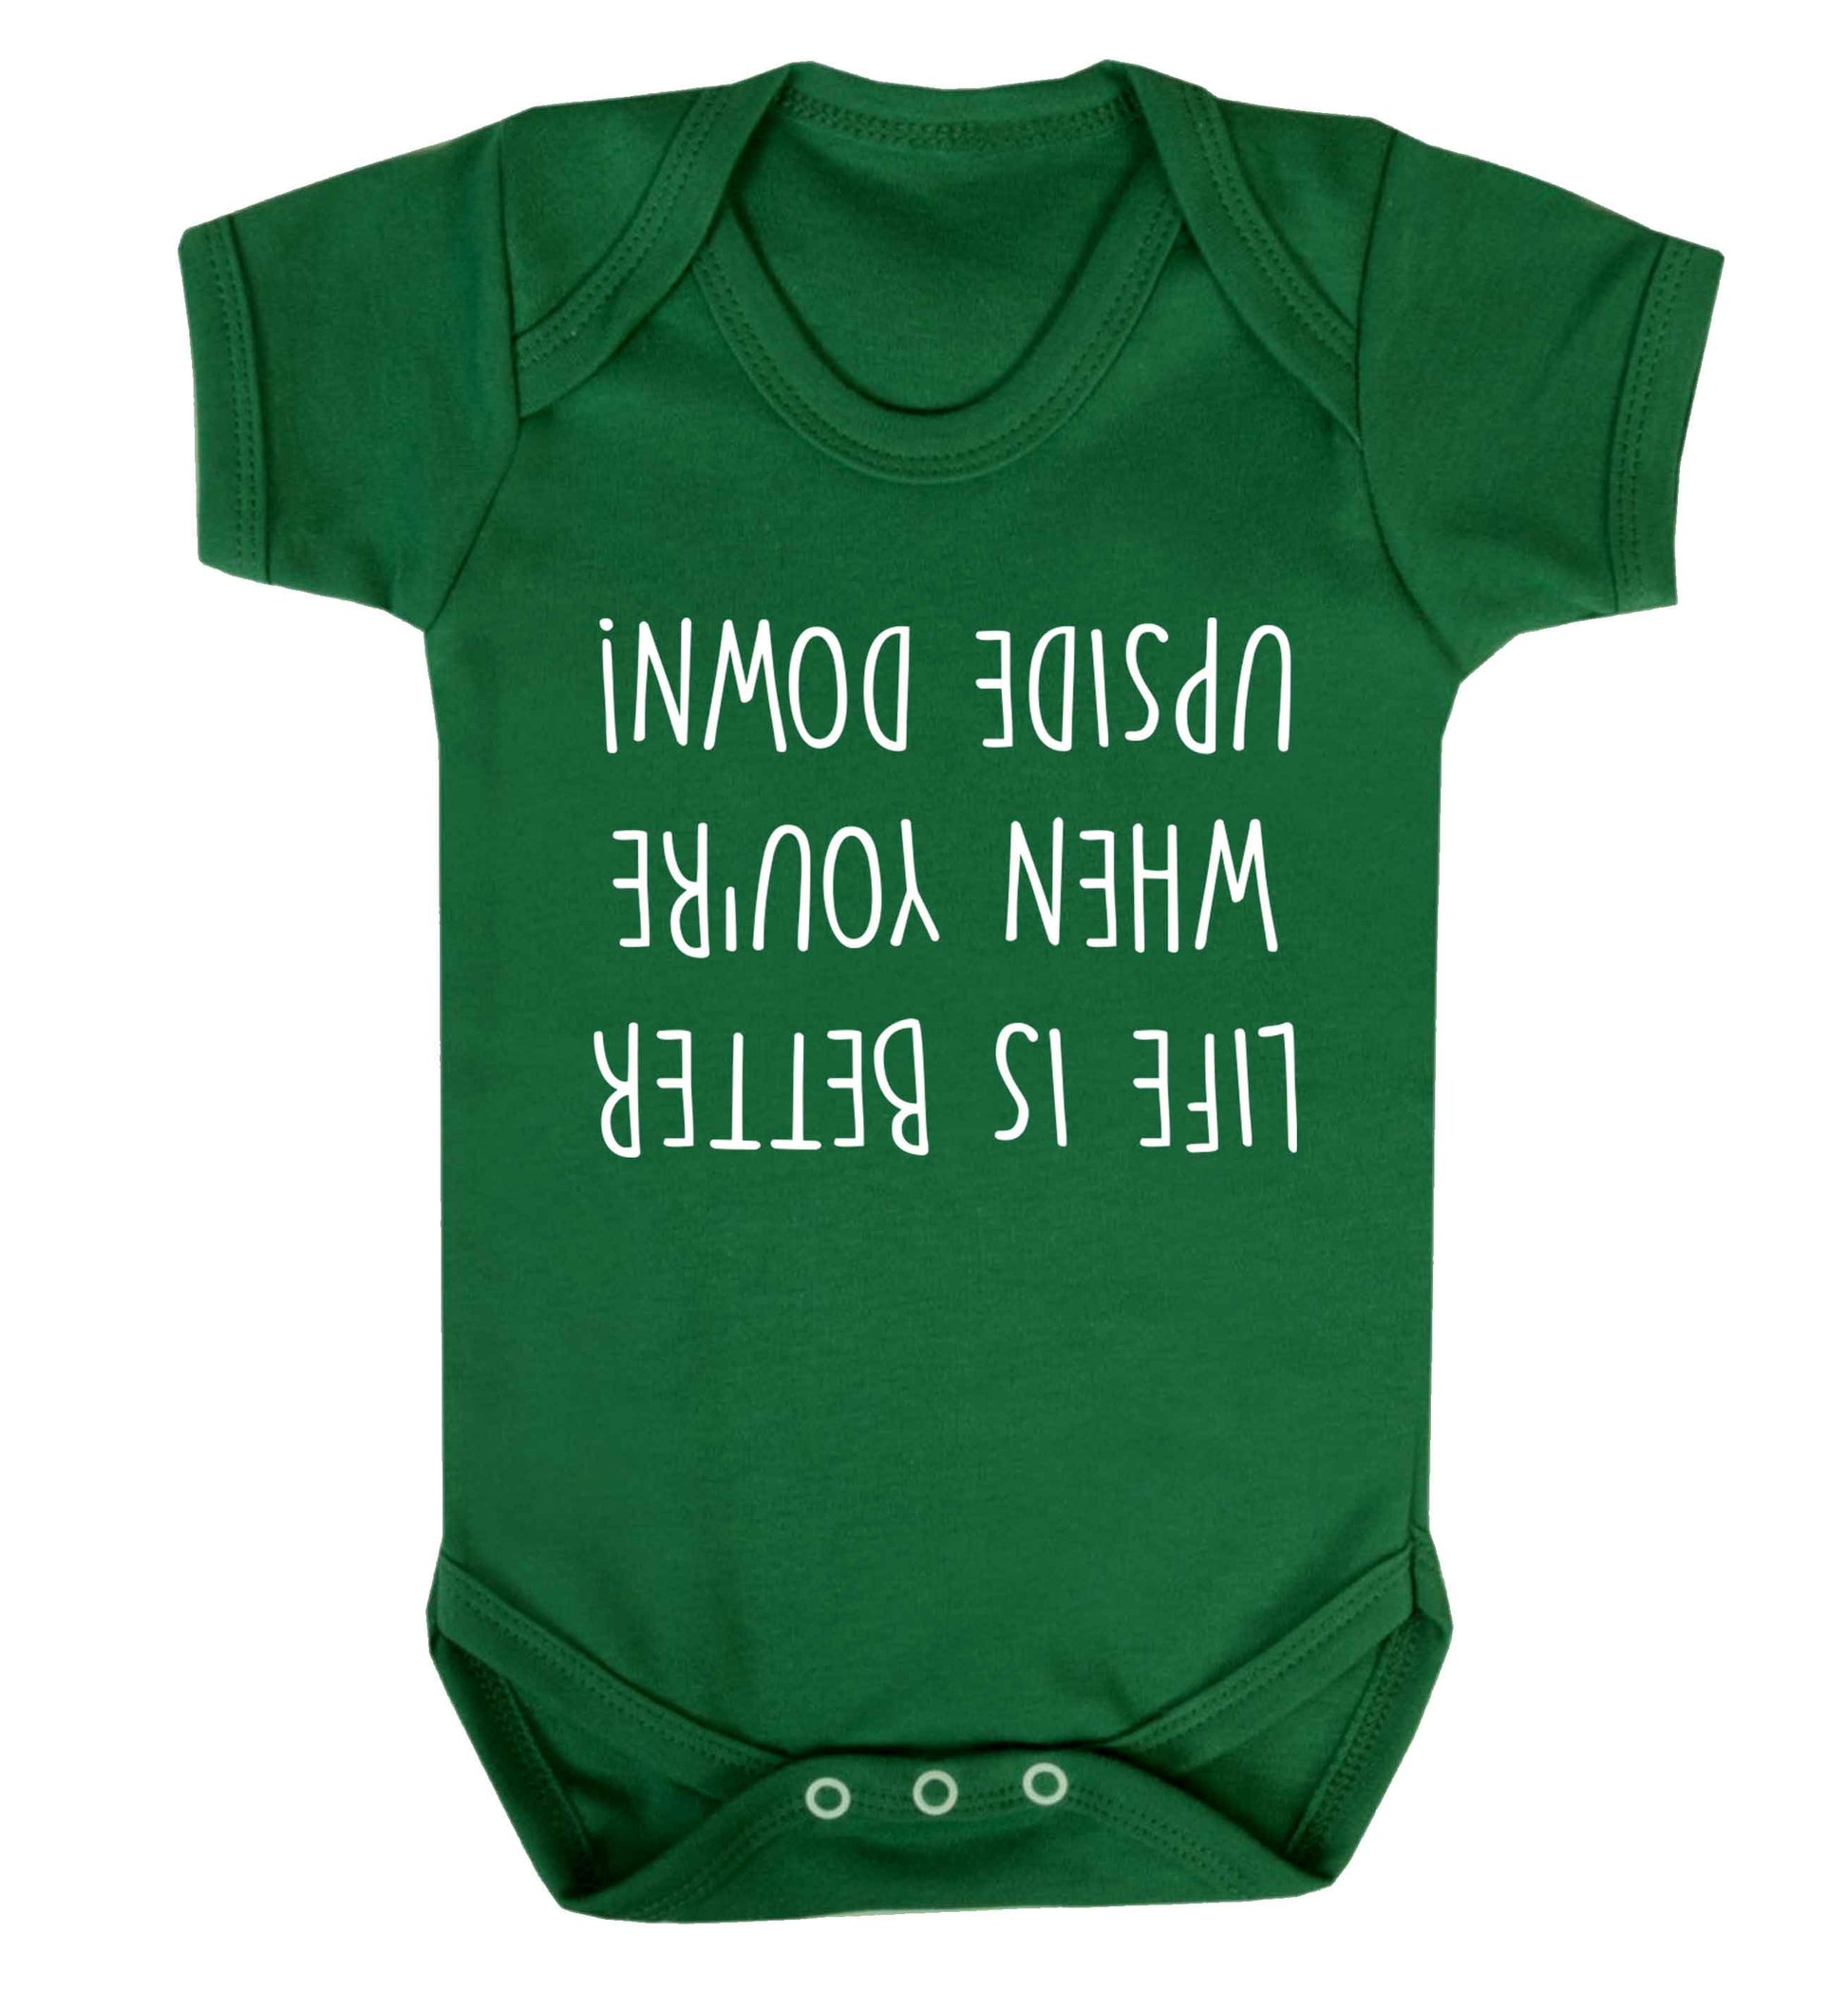 Life is better upside down Baby Vest green 18-24 months